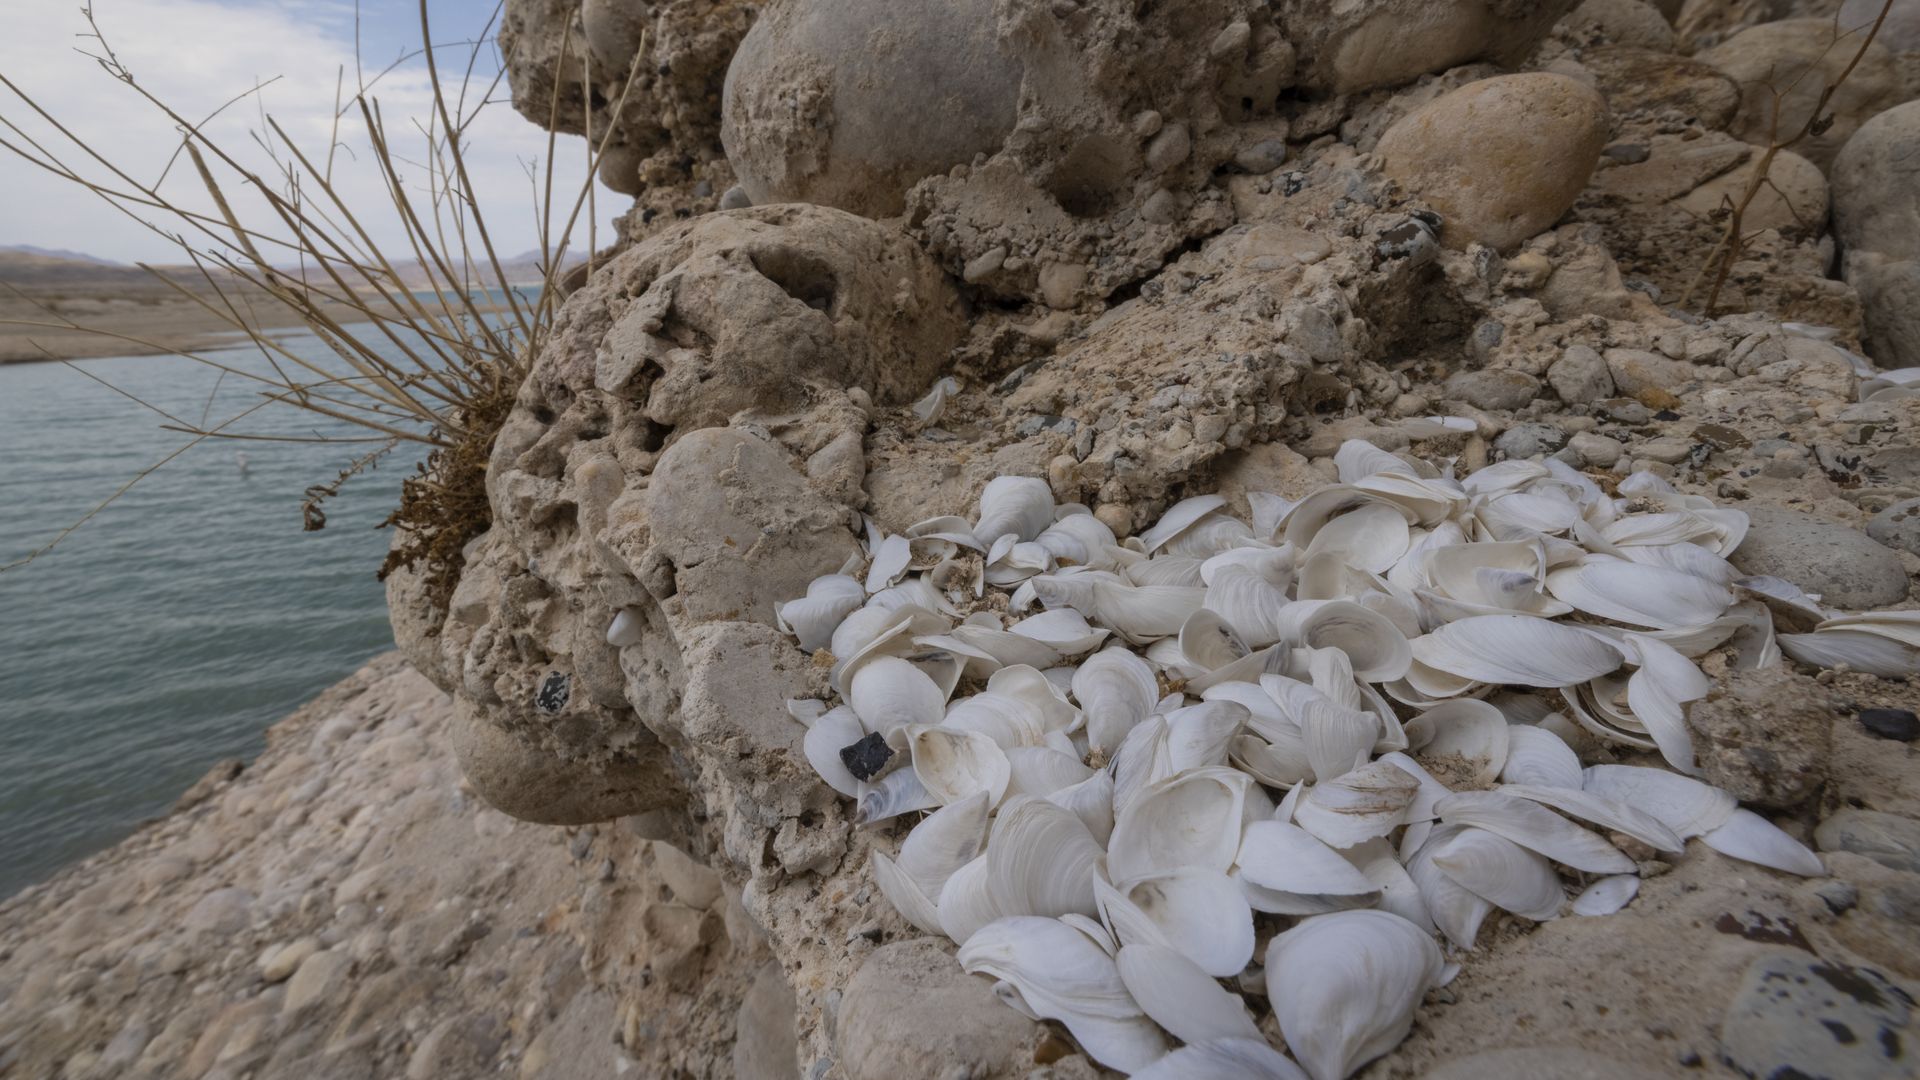 Clam shells remain on previously submerged rocks as worsening drought drops the water level of Lake Mead